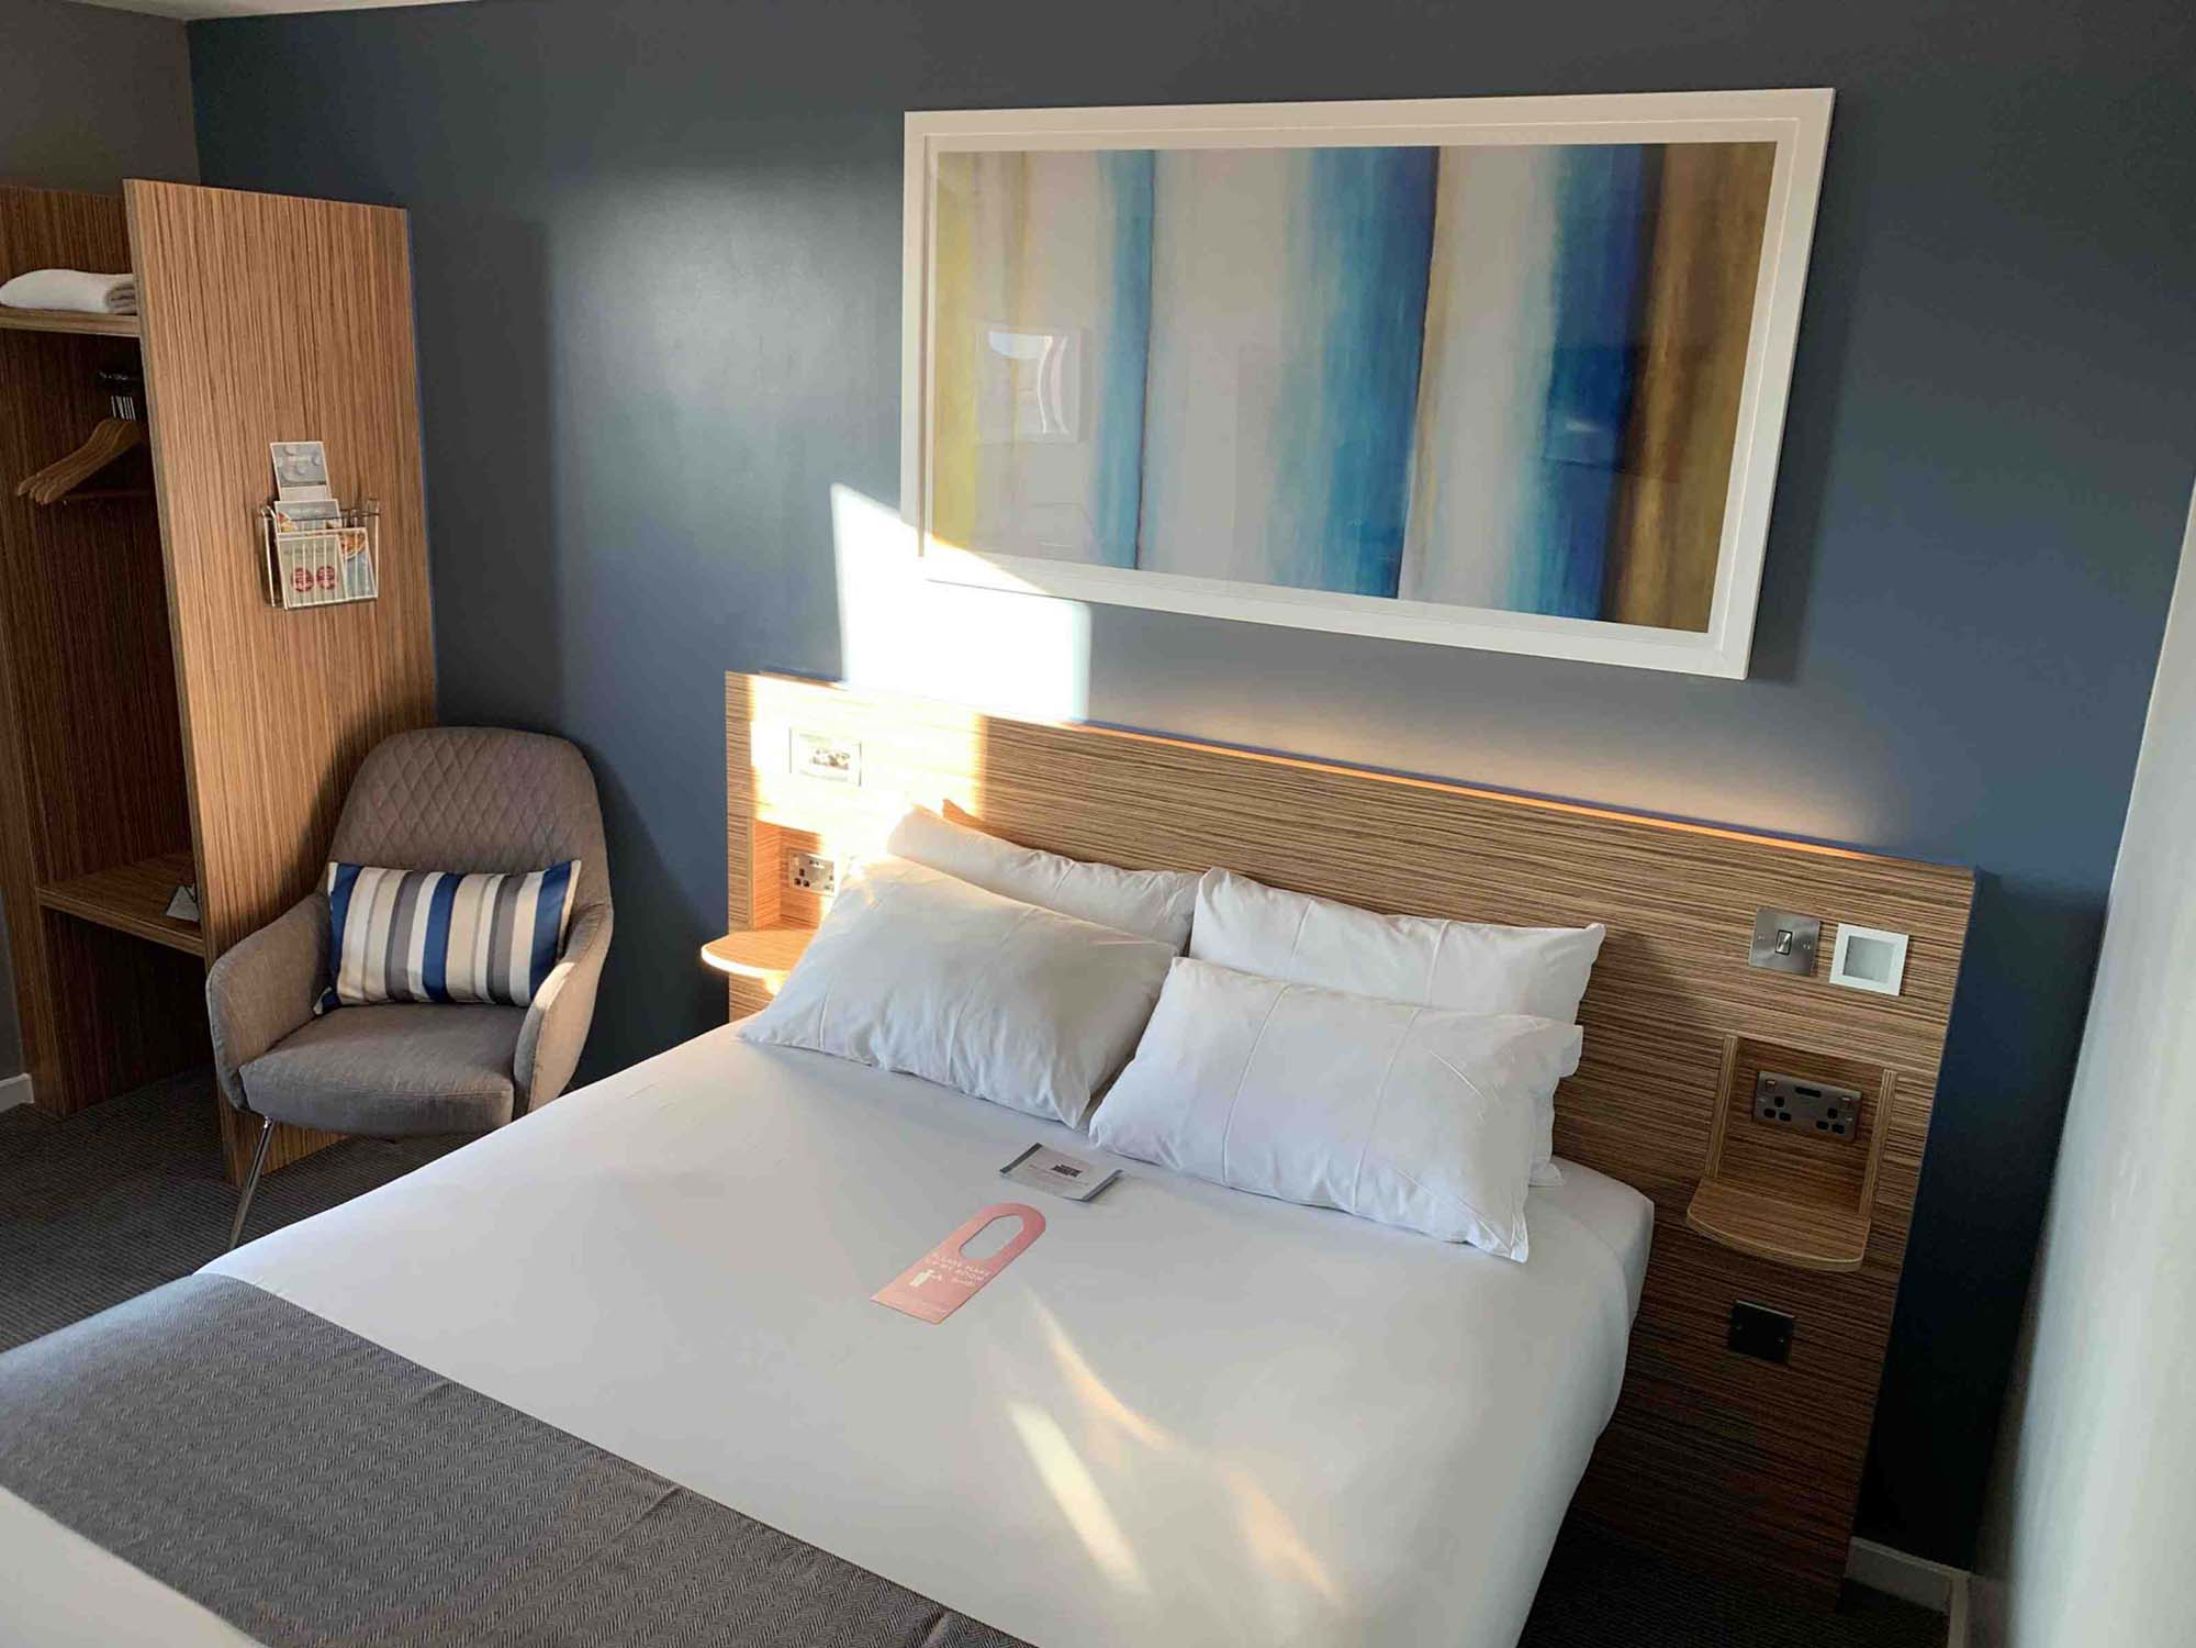 Best Hotels in Southampton - Travelodge Southampton Central